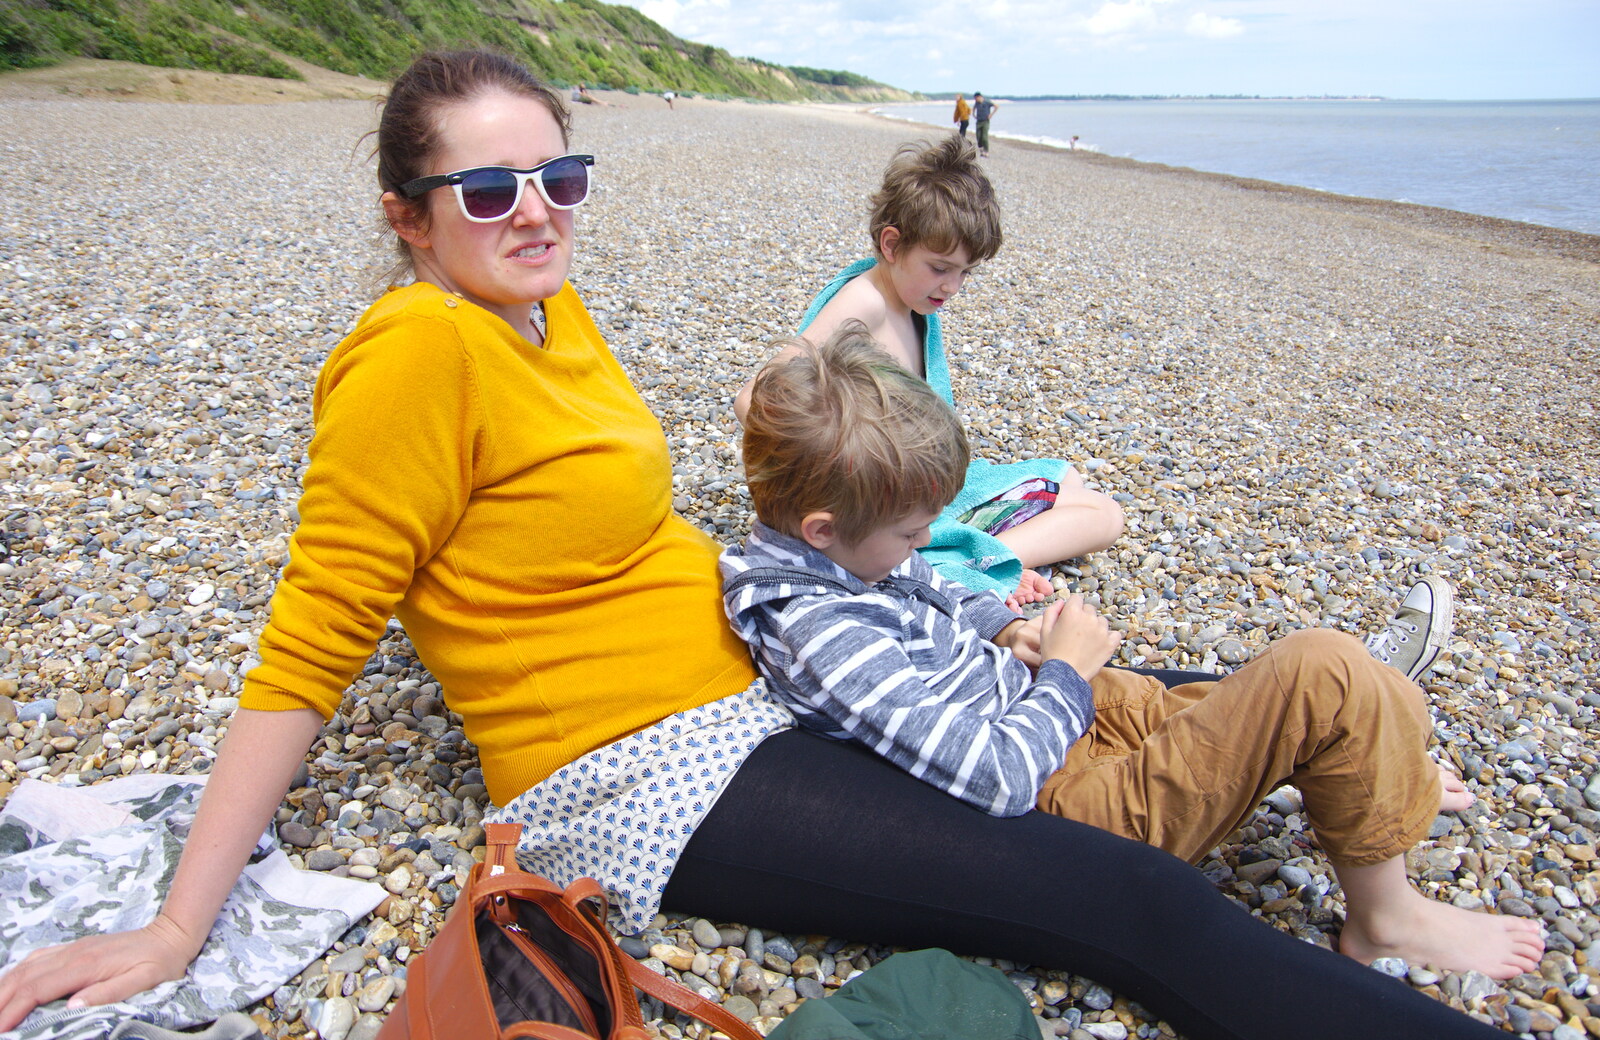 Isobel and the boys from Cliff House Camping, Dunwich, Suffolk - 15th June 2019